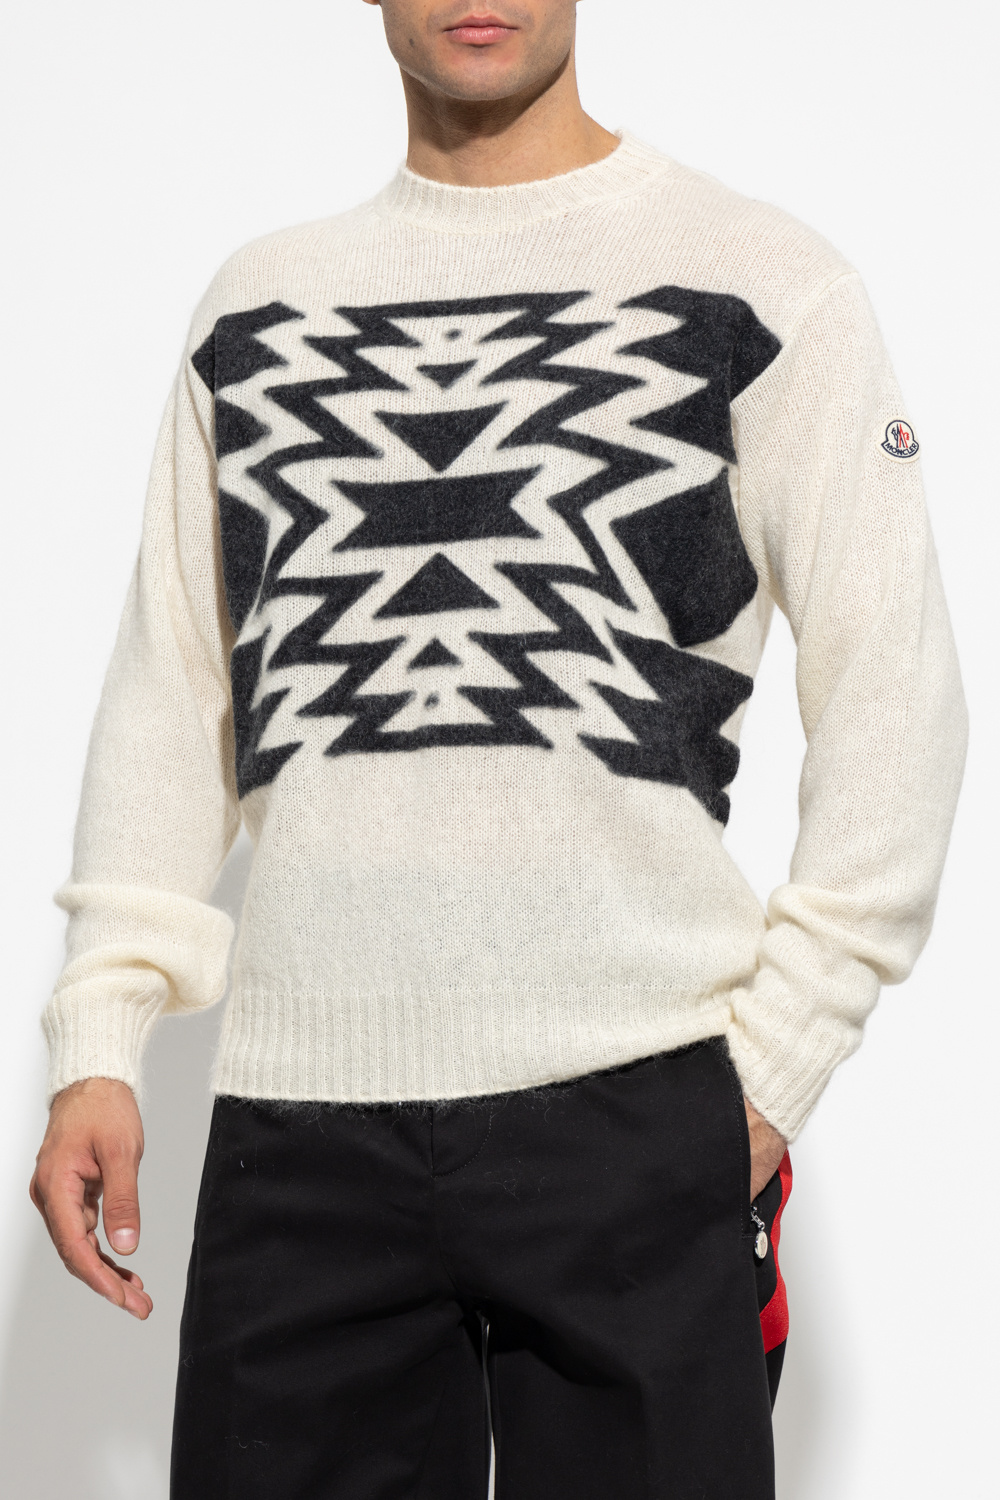 Moncler Patterned sweater